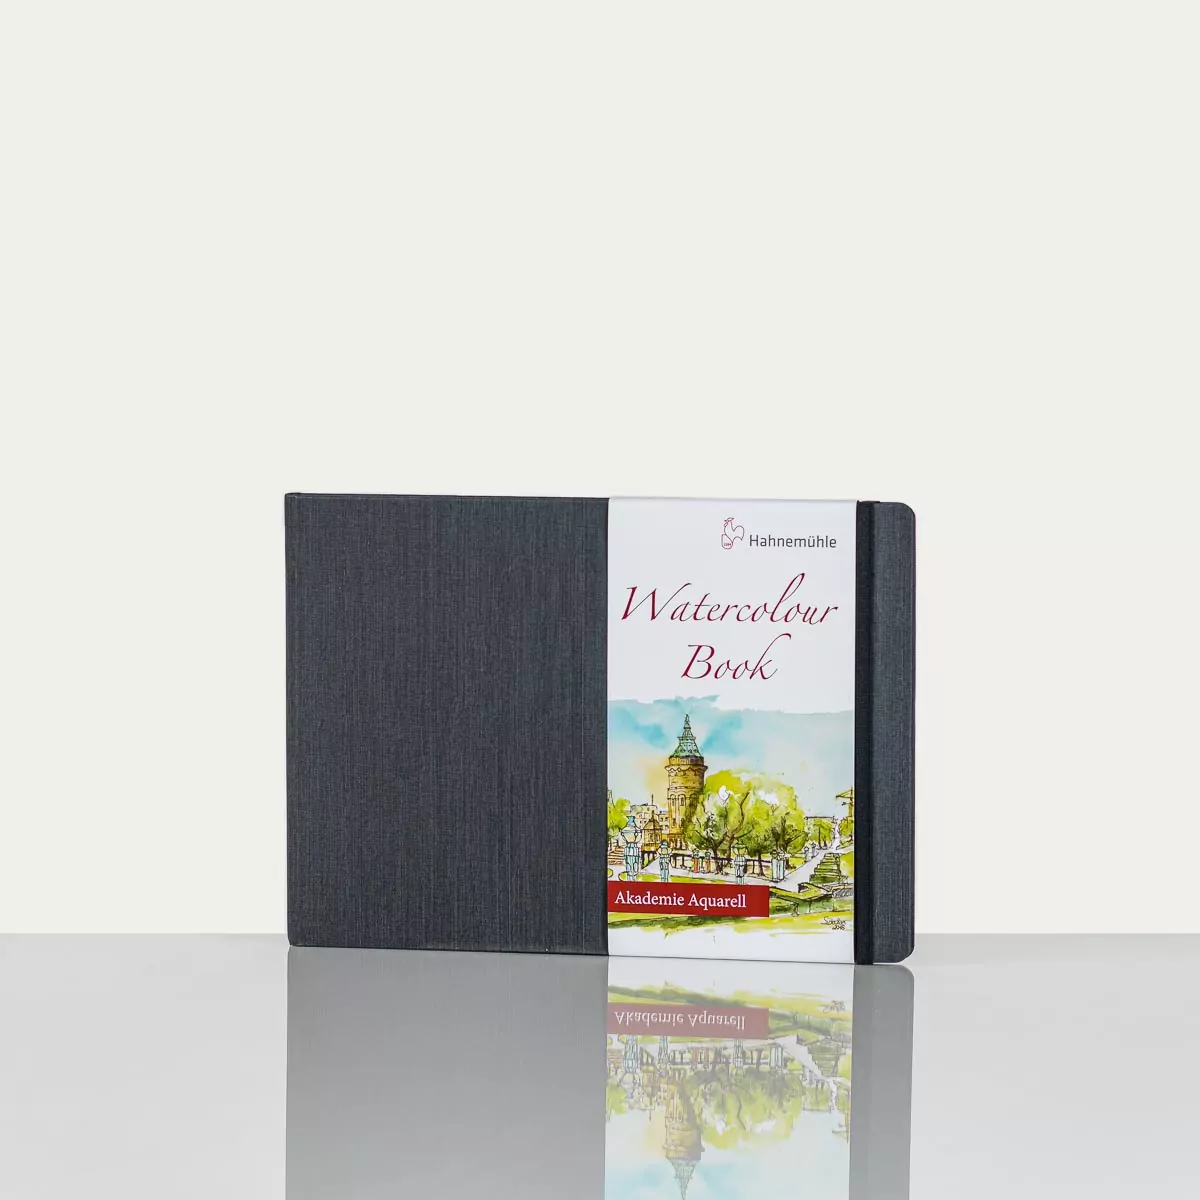 Traditional Hahnemuhle Watercolour Book Landscape size  * 200g/m² 30 Sheets/60pages A6